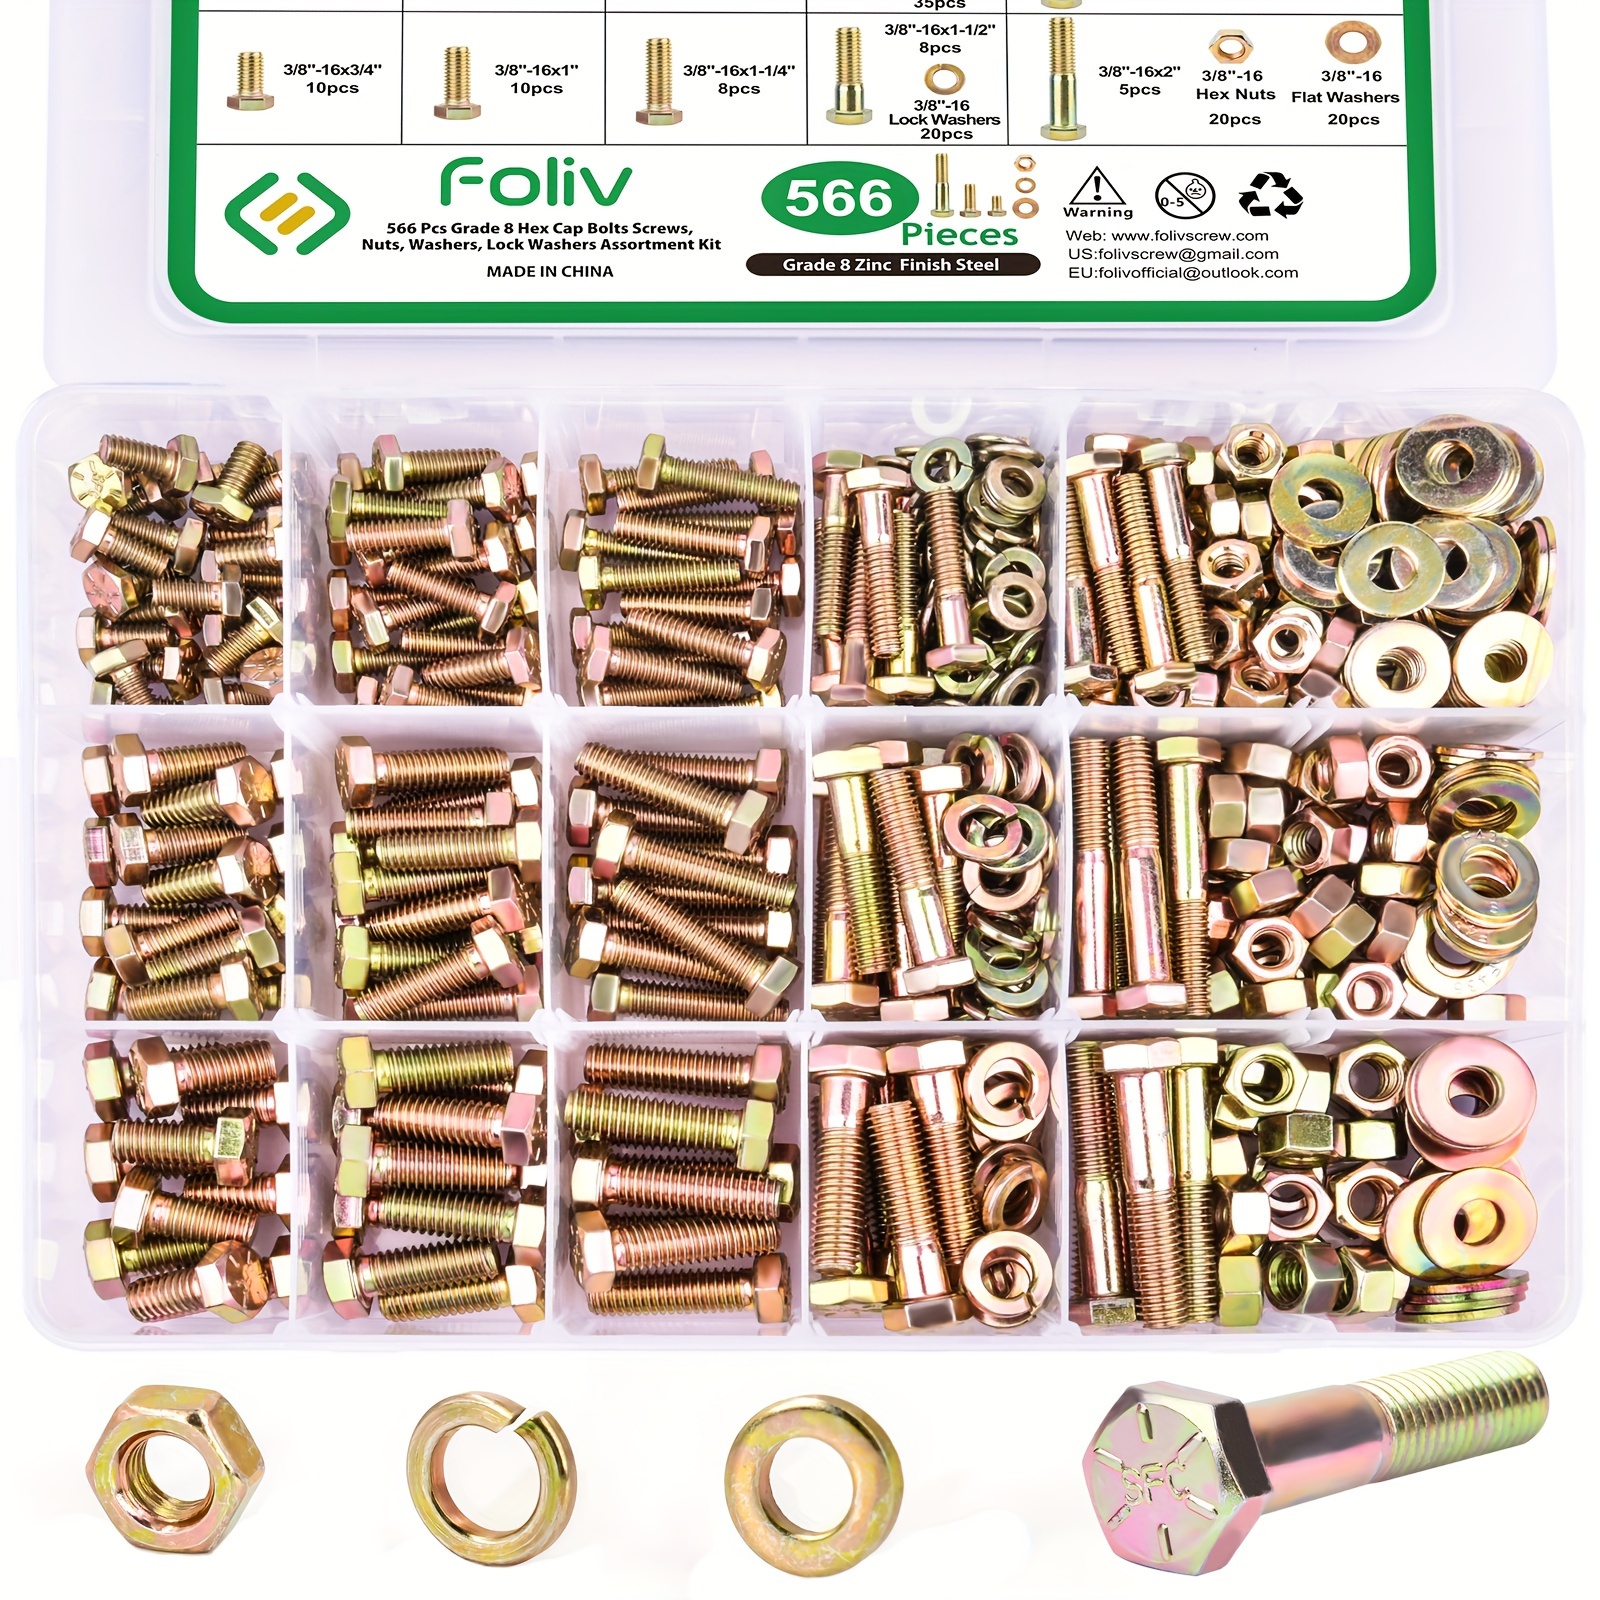 

Foliv 566pcs Heavy Duty Bolts And Nuts Assortment Kit, Grade 8 Hex Screws Bolts Nuts Kit, 1/4-20 5/16-18 3/8-16, 15 Common Sizes Included